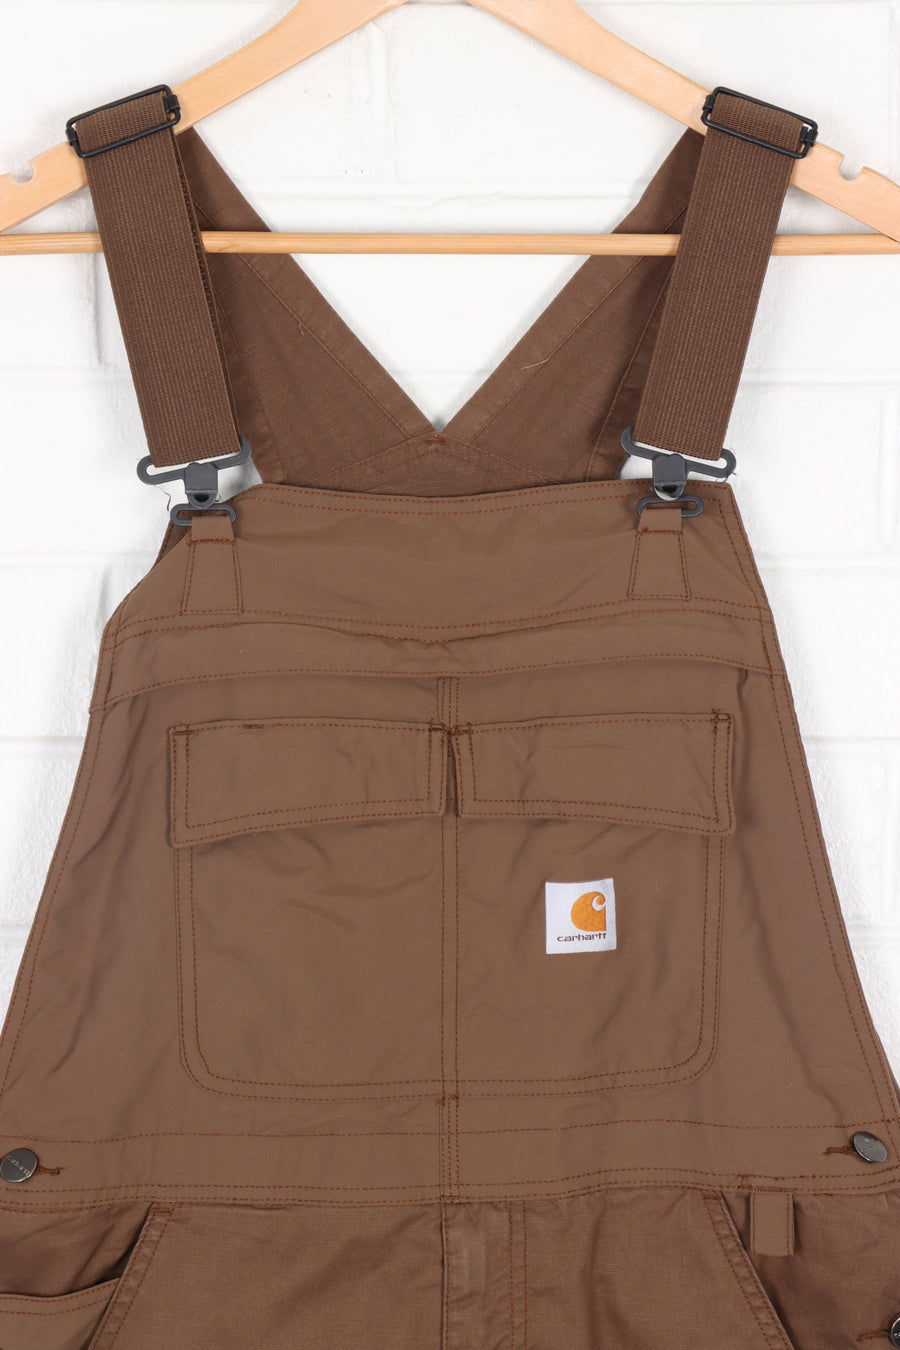 CARHARTT Force Extremes Brown Long Overalls (36x30)